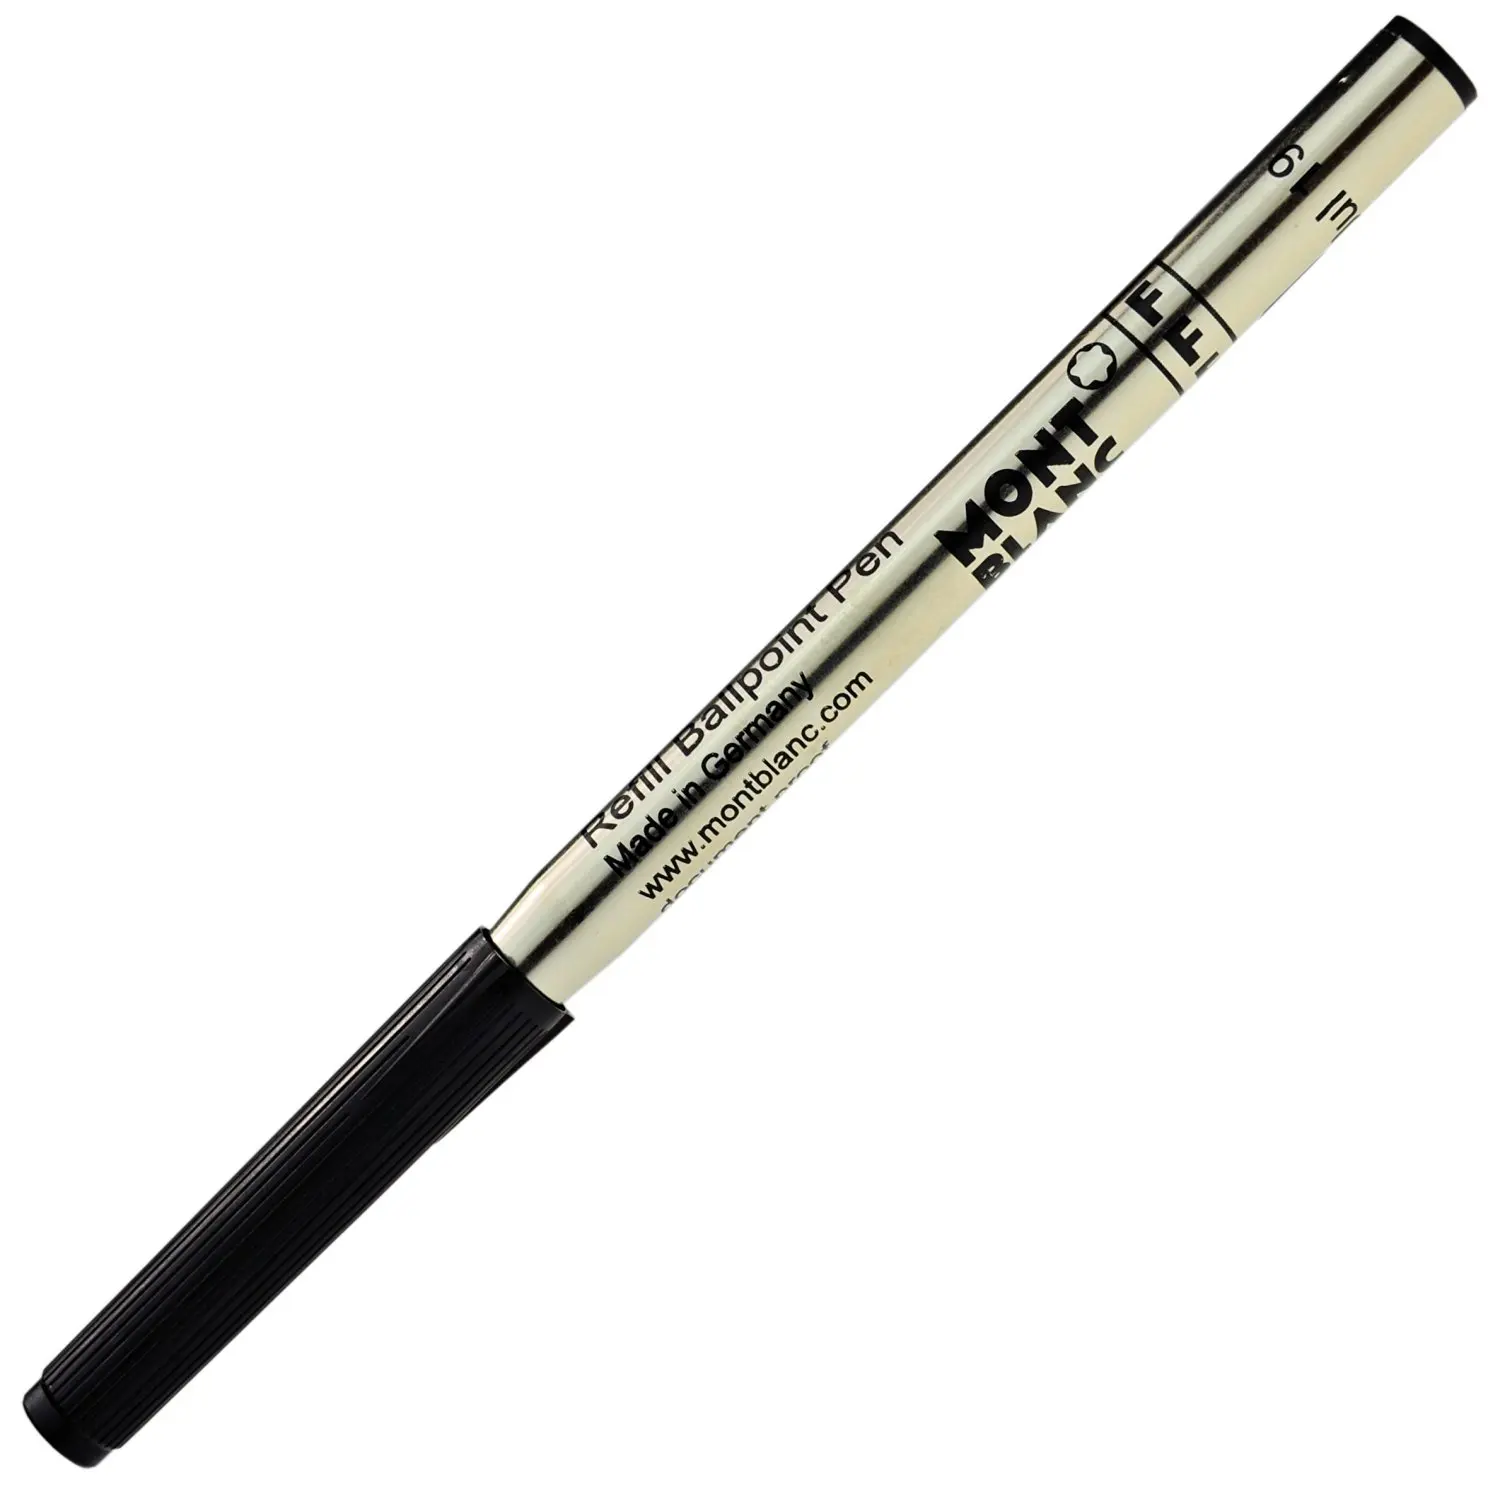 Buy MONTBLANC core replacement [Mont Blanc] for ball-point pens (refill) BK (black) M (character 